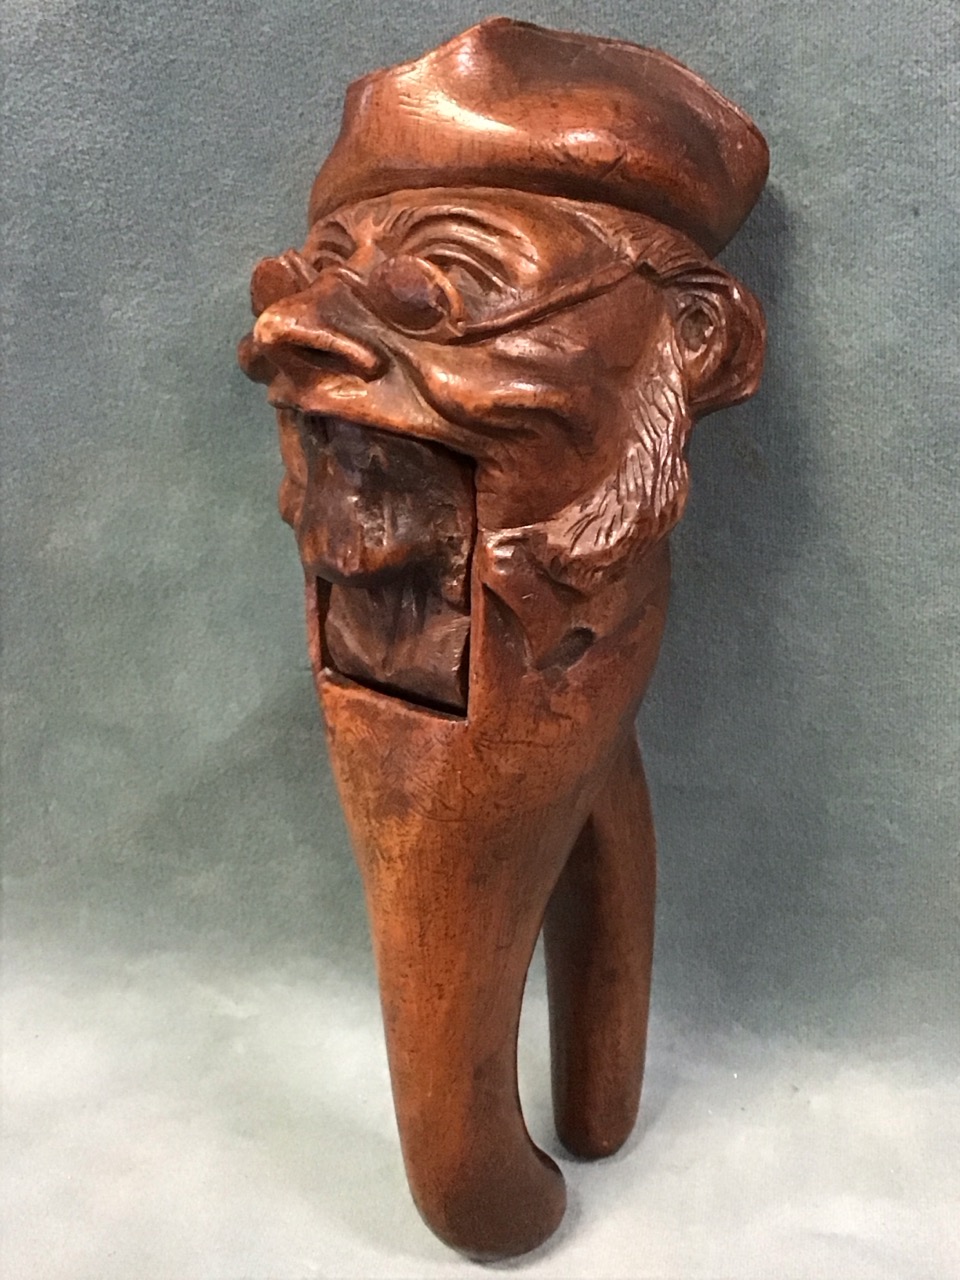 A C19th Swiss carved walnut nutcracker in the form of a comical old man wearing a tricorn hat and